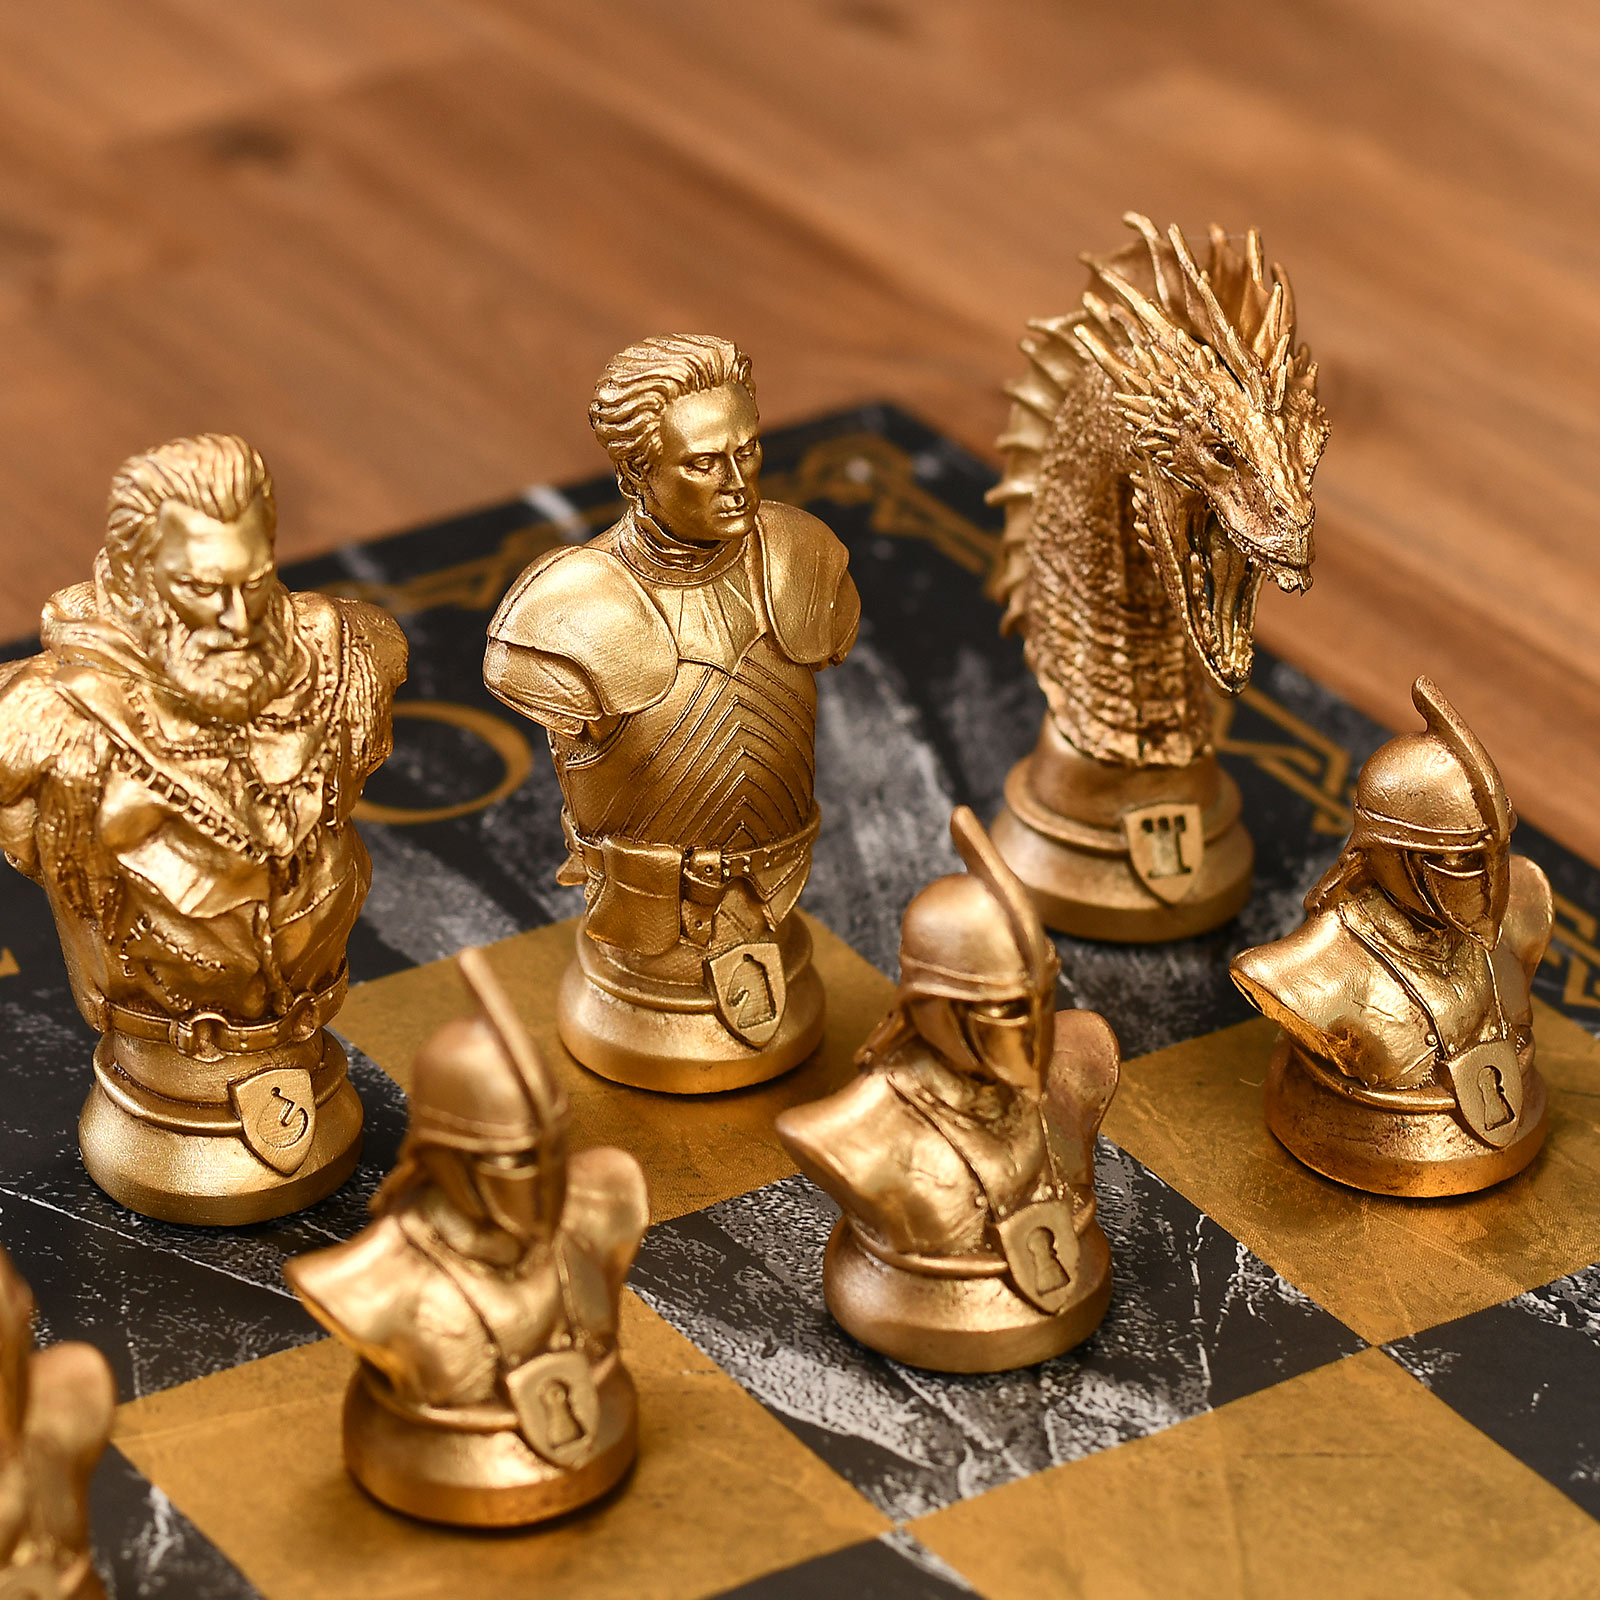 Game of Thrones - Chess Set Collectors Edition